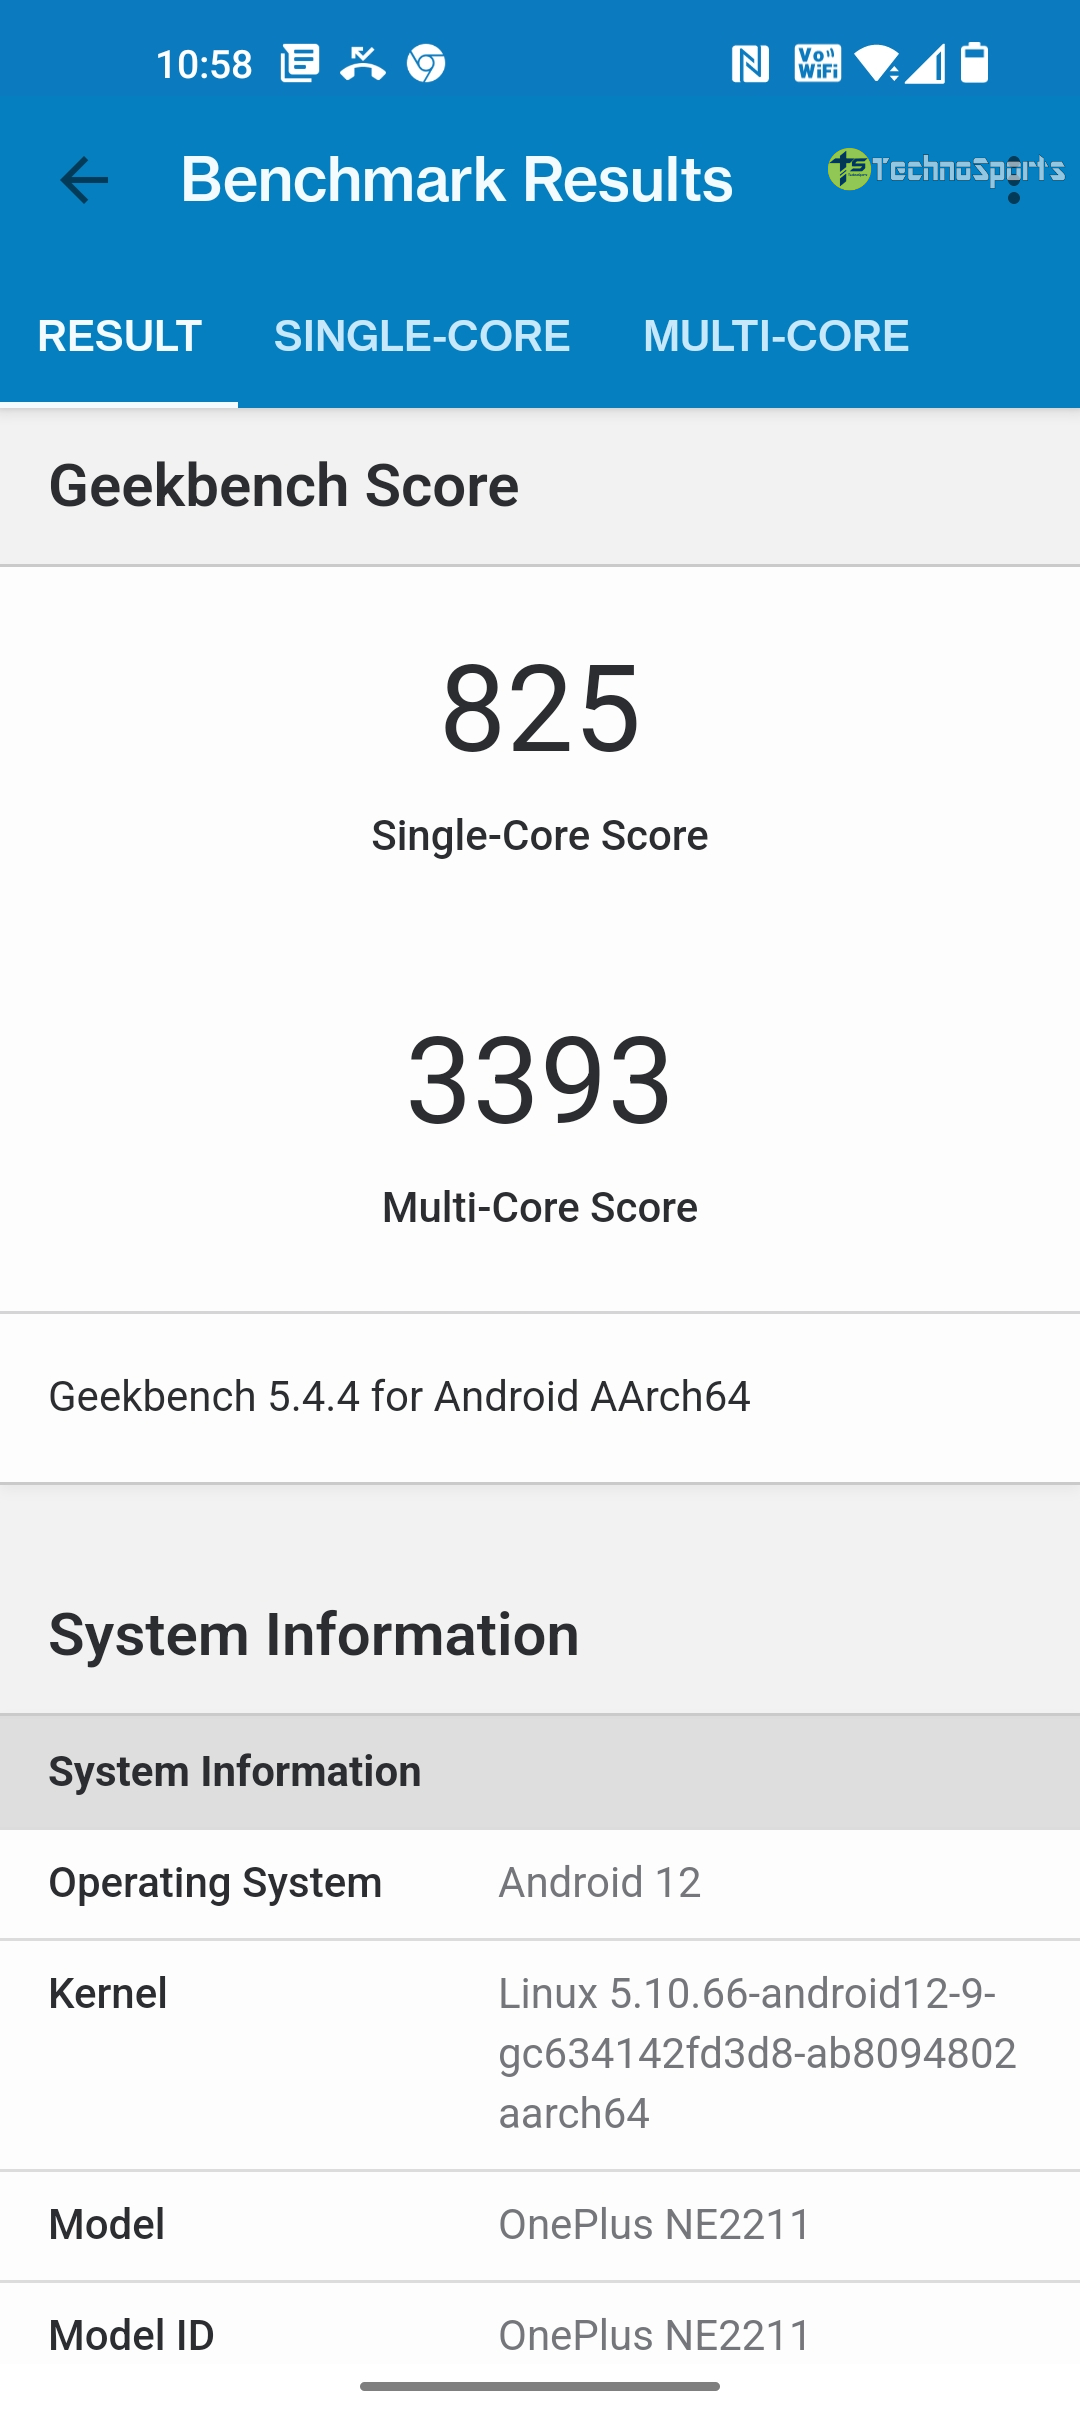 The Snapdragon 8 Gen 1 in the OnePlus 10 Pro do throttles but not as much as others